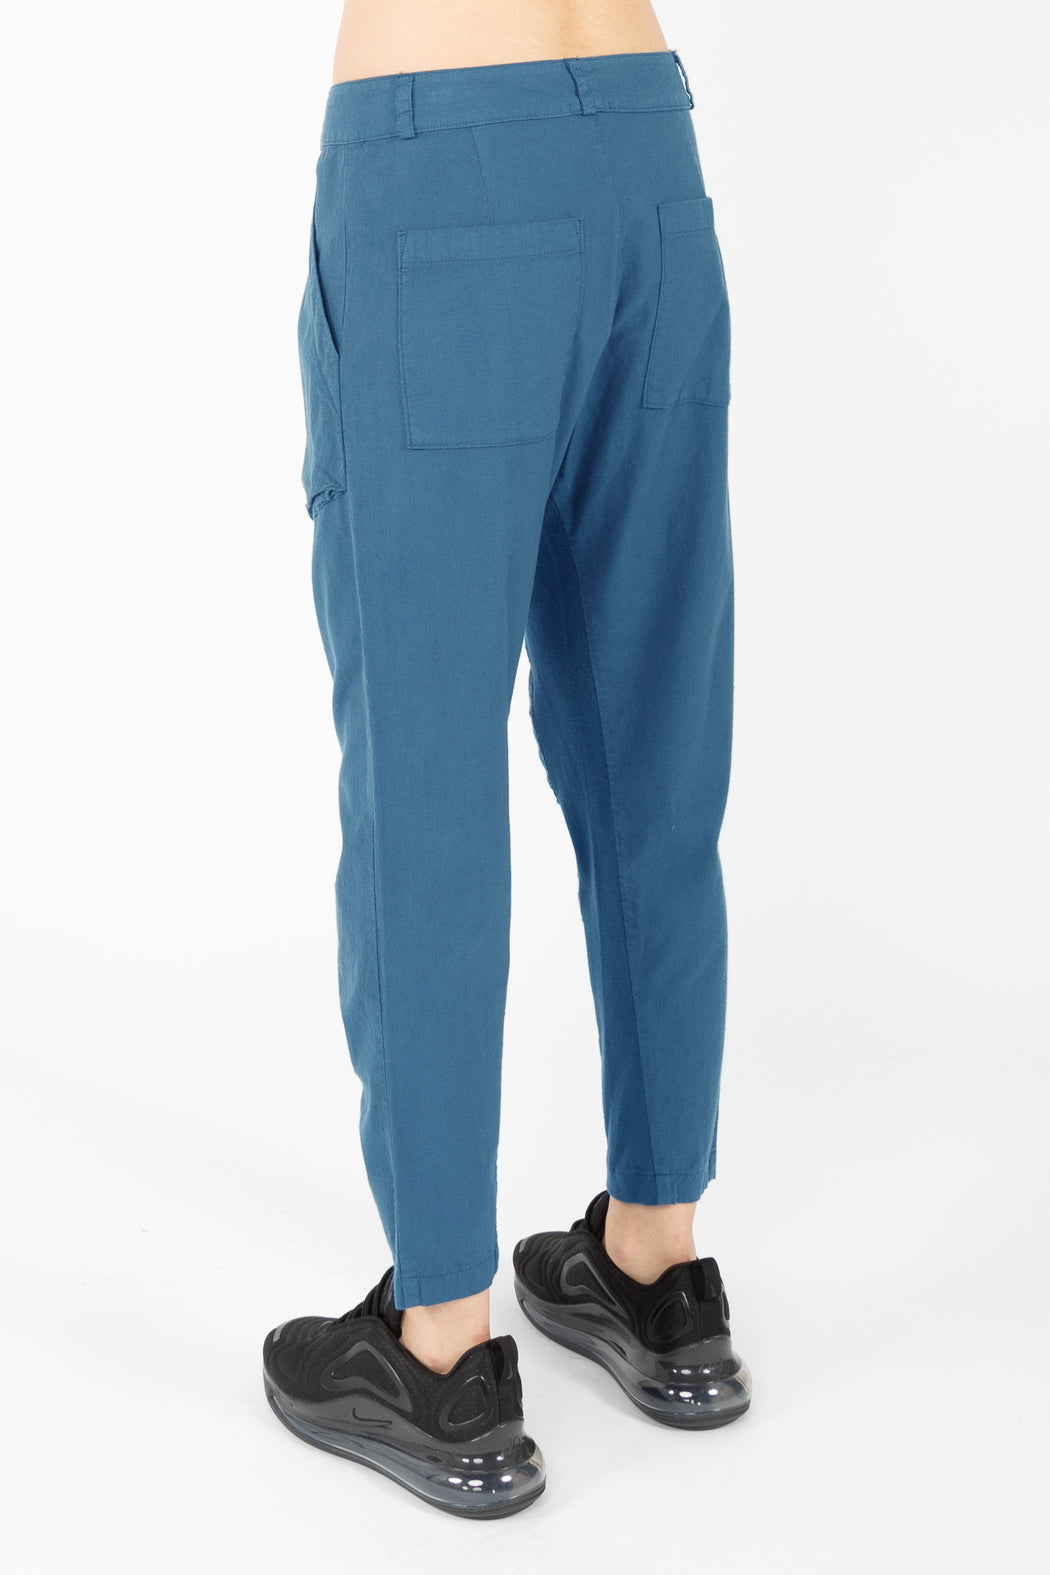 An incredibly soft, relaxed, lightweight pant with an organic cotton muslin body has an organic cotton knit inset at the inseam for style and comfort. A mid-rise, exposed button fly pant with deep gusseted front pockets, back patch pockets and belt loops.The softened cotton will loosen with wear, the initial fit should be snug.